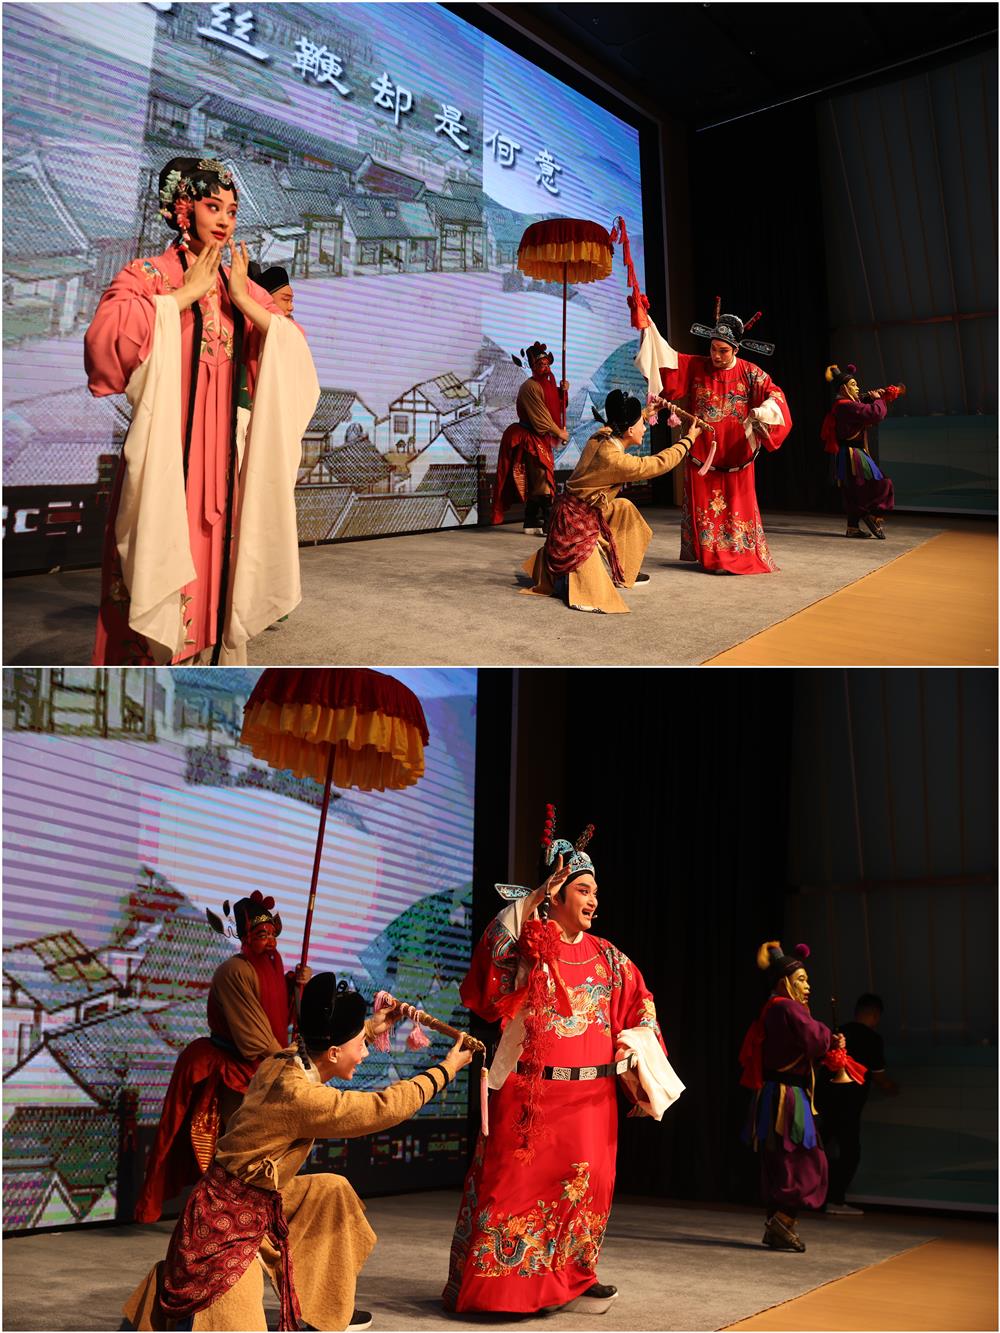 Opening the "Drama Comes from Wenzhou" Southern Opera Classic Culture Week, "China's First Drama" Comes to Shanghai Opera | Wenzhou | Culture